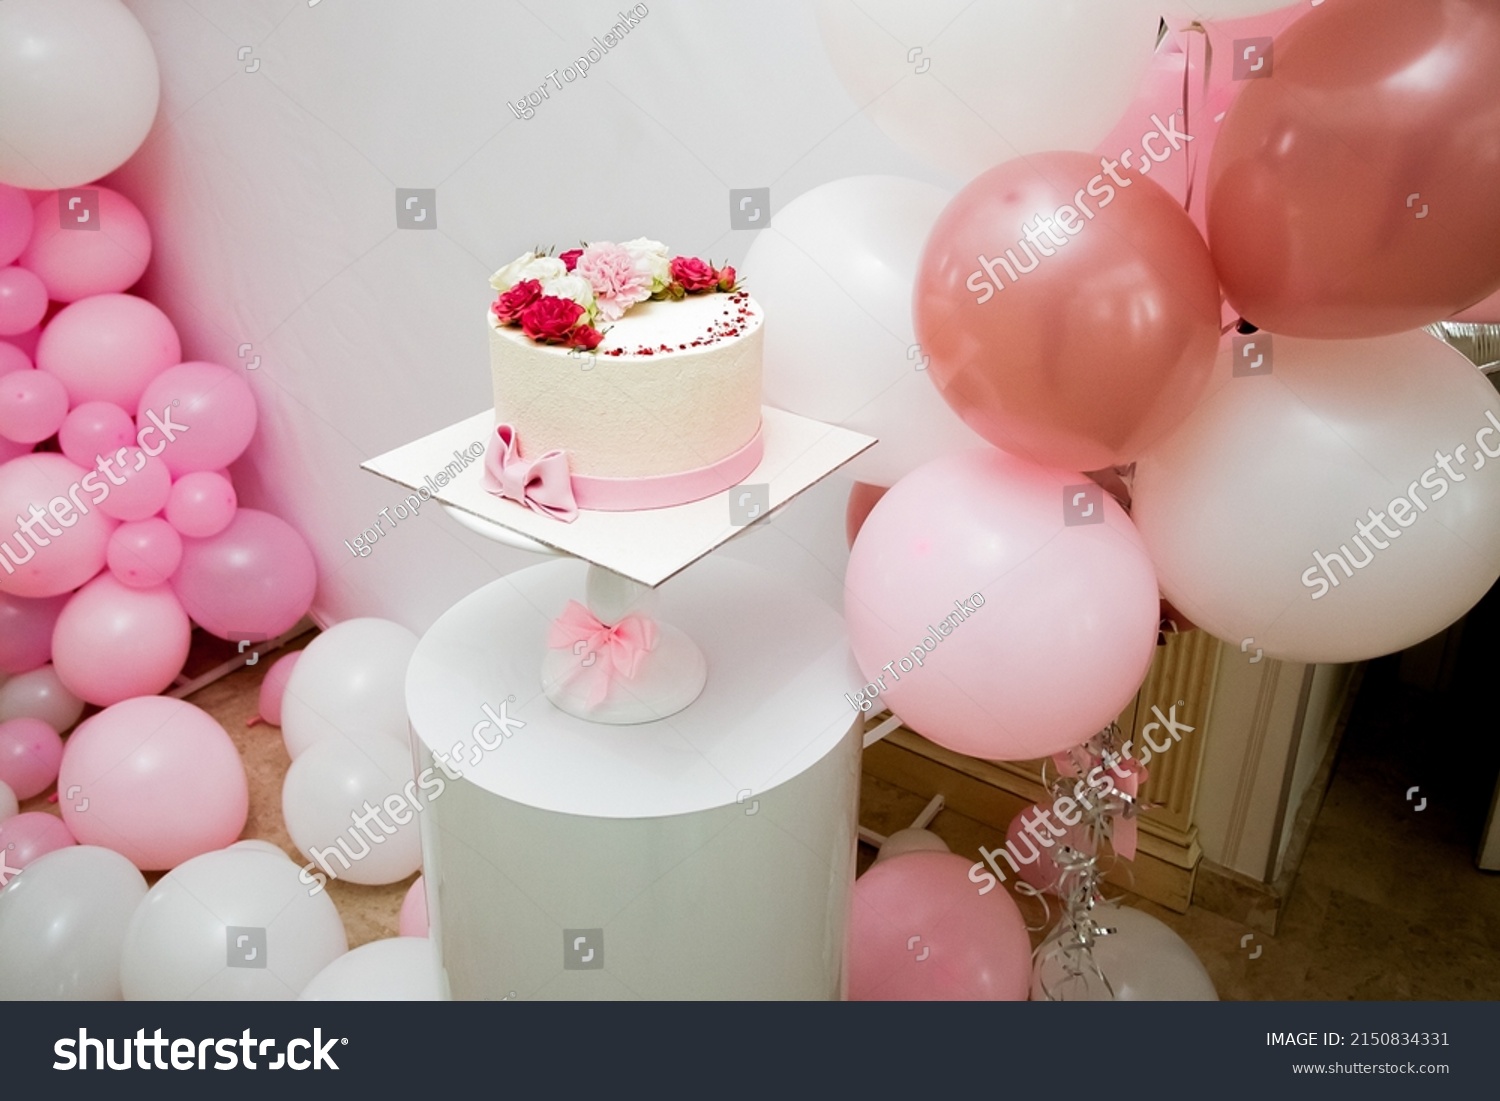 An appetizing festive yellow cake adorned with vibrant red, white and pink flowers sits on a white decorative stand in a room adorned with pink and white balloons. #2150834331